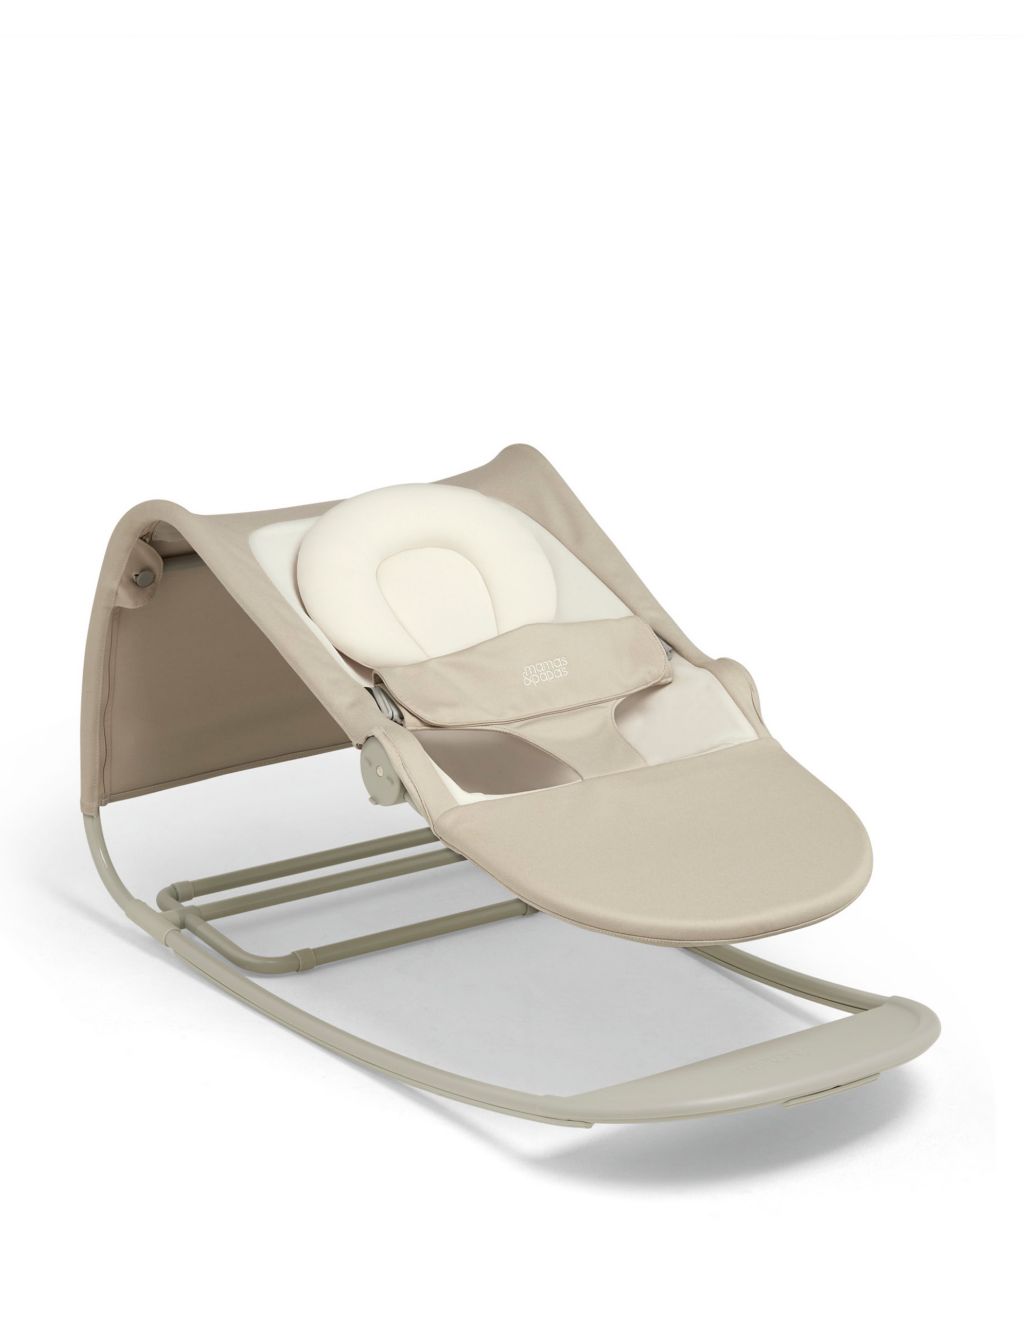 Tempo 3-in-1 Rocker Ivy Bouncer image 3